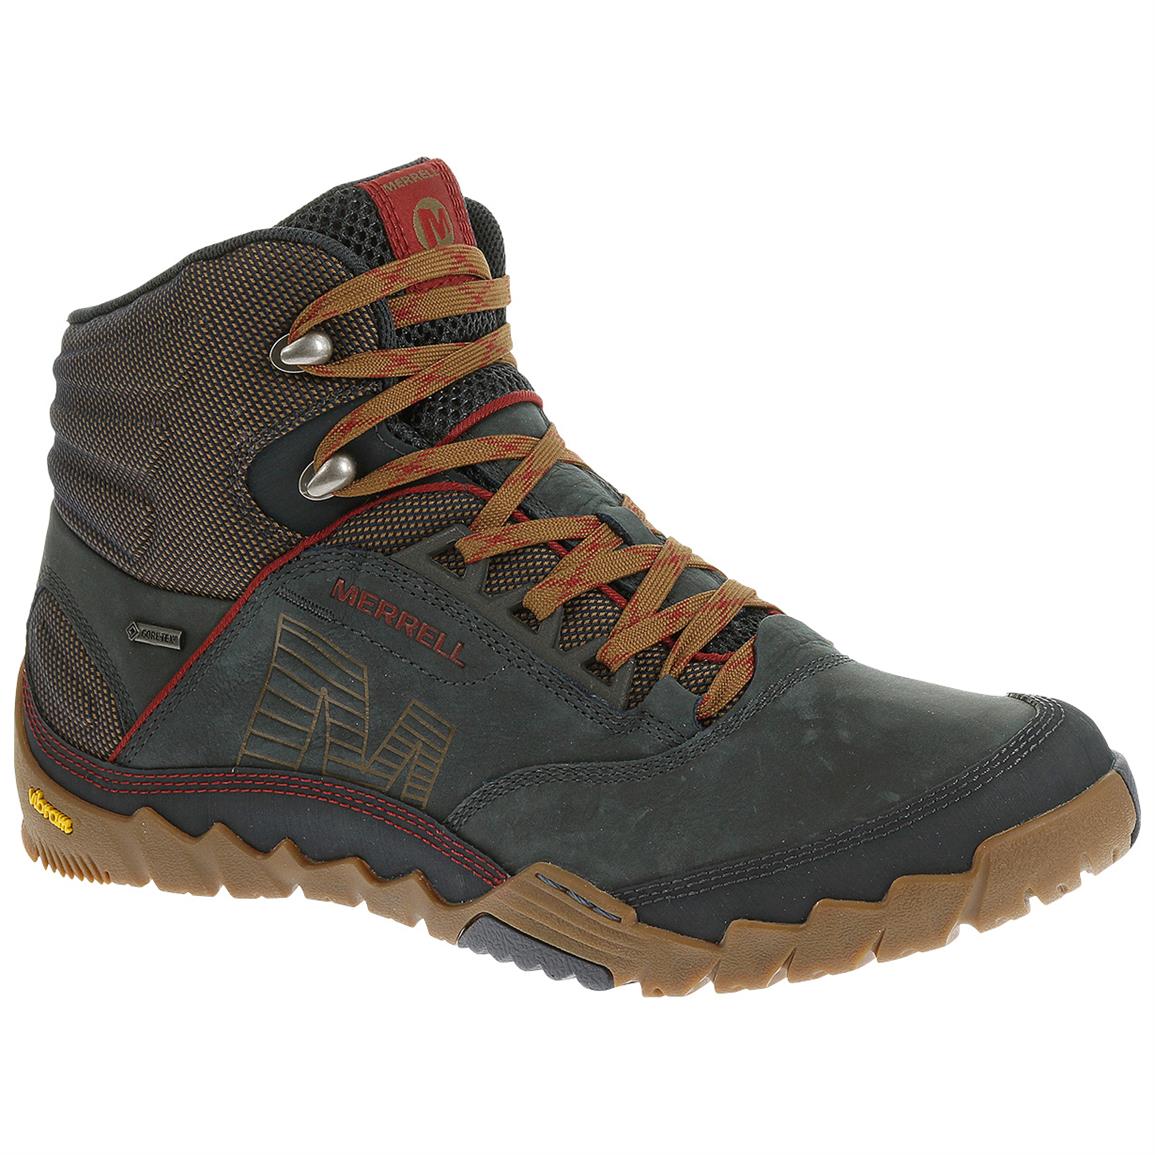 Merrell Annex Mid GORE-TEX Hiking Boots - 643869, Hiking Boots & Shoes ...